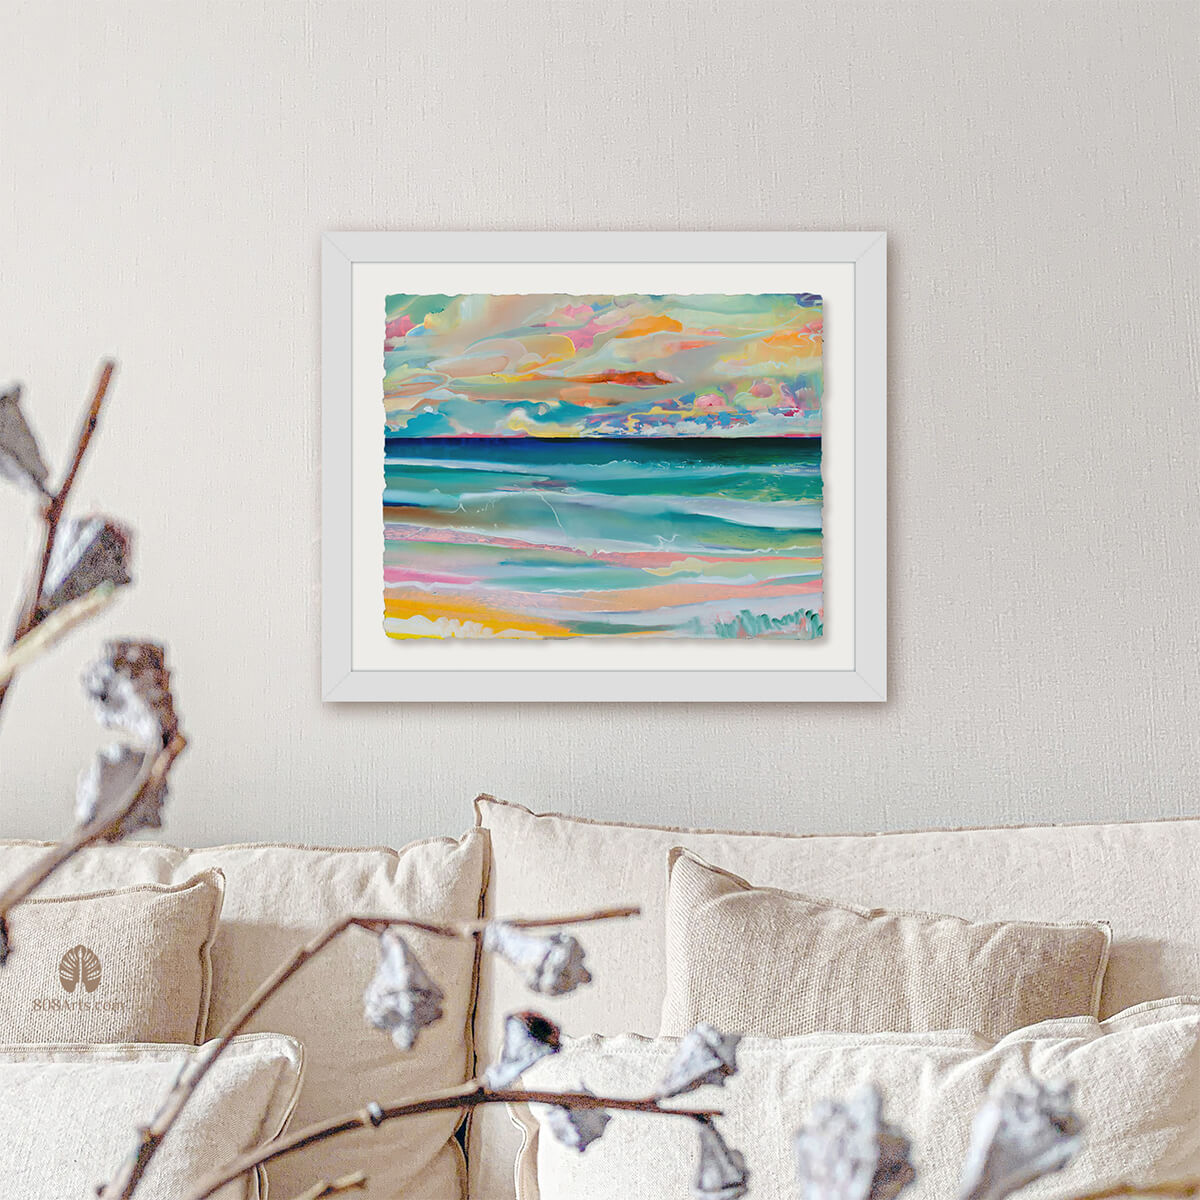 Framed seascape art print by Hawaii artist Saumolia with deckled edges hanging in minimal living room